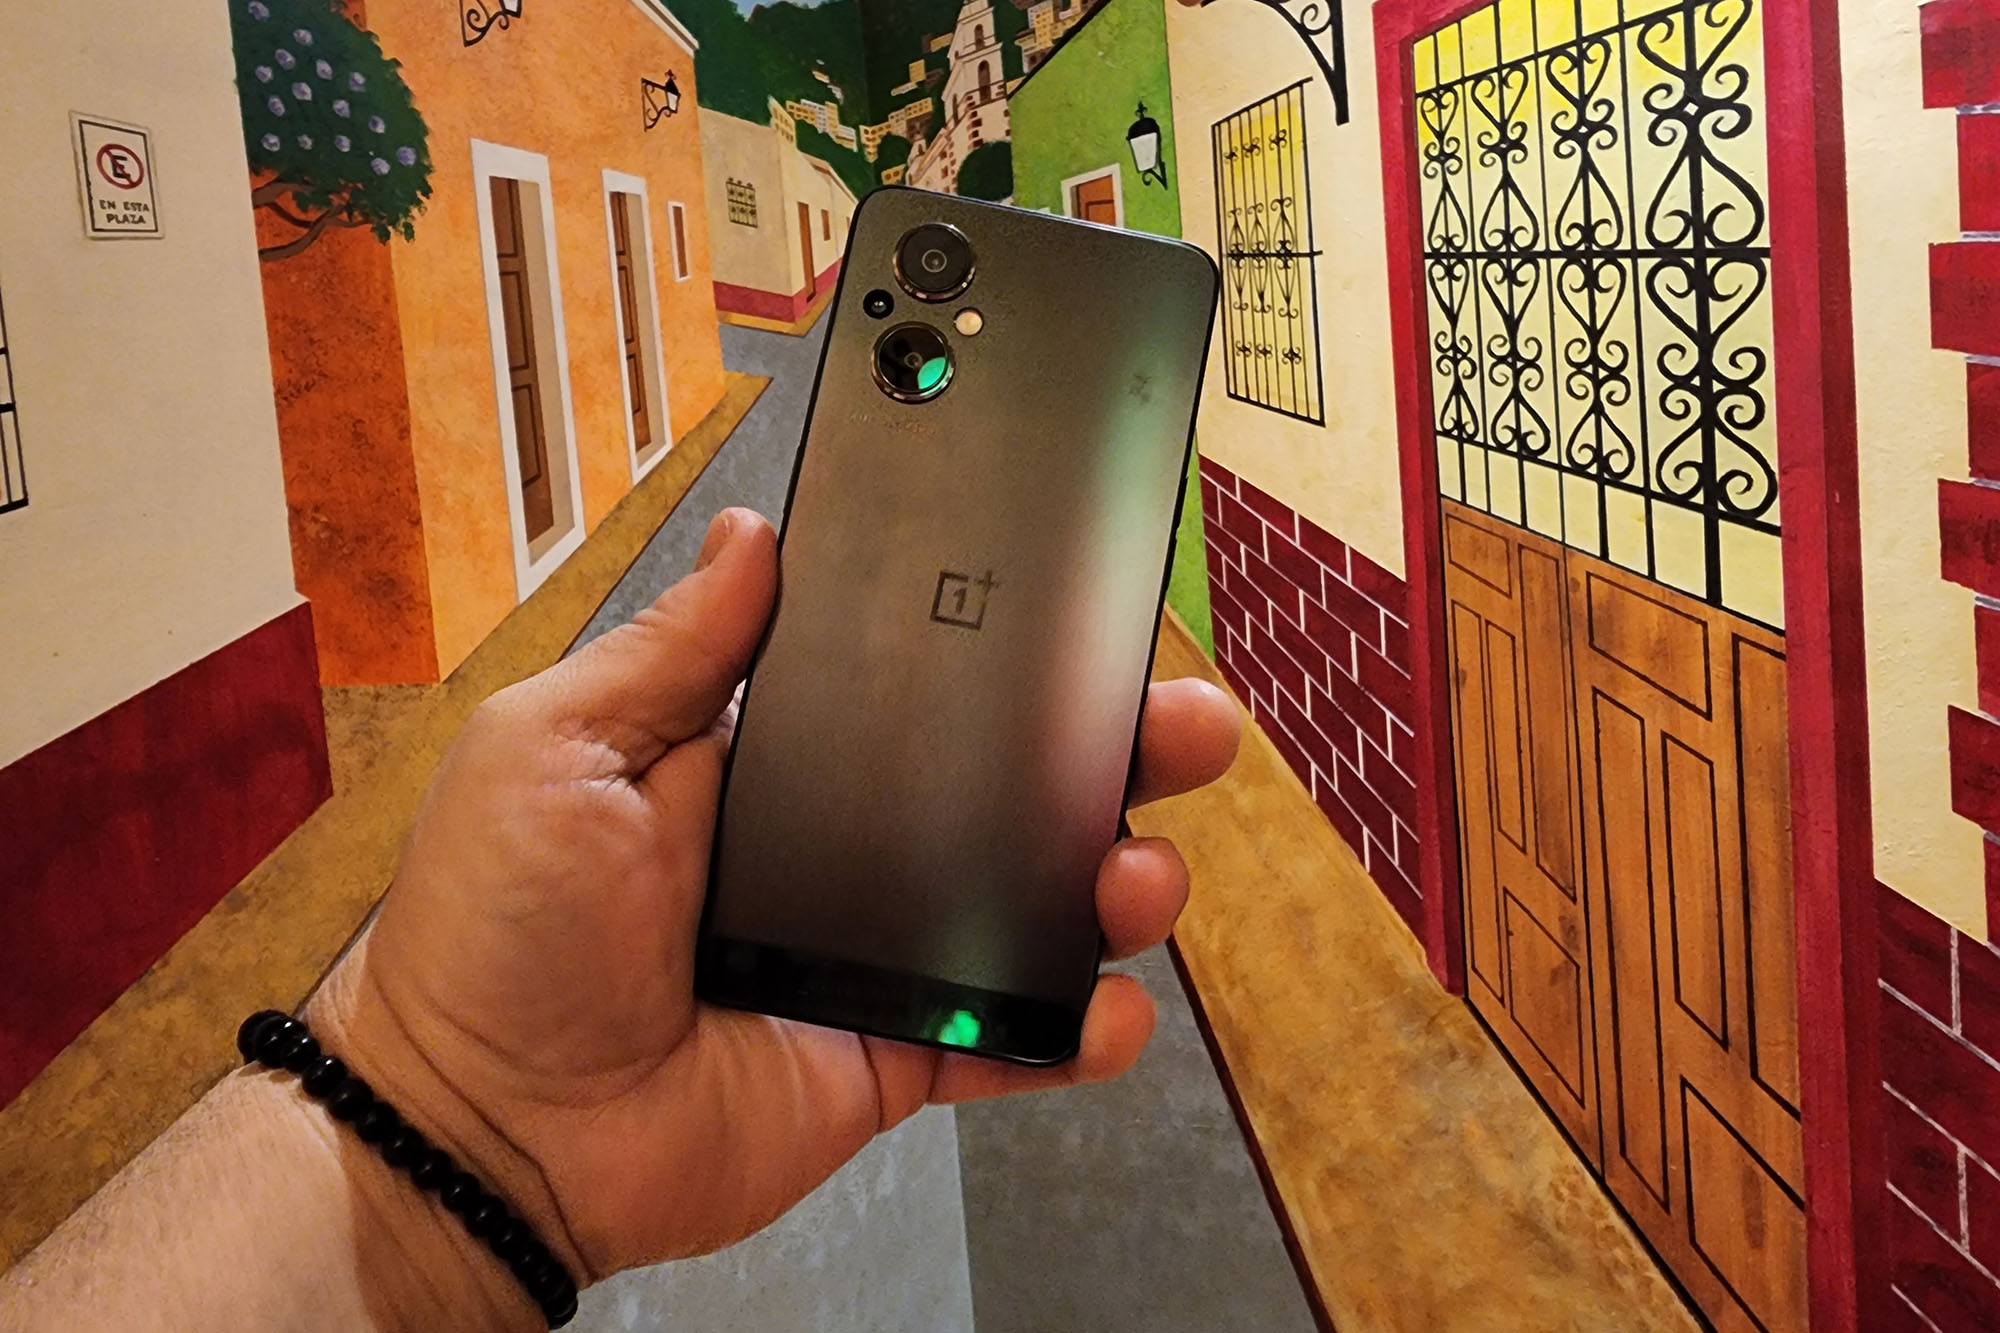 Nord CE 3 Lite 5G review: Solid entry point to OnePlus smartphone